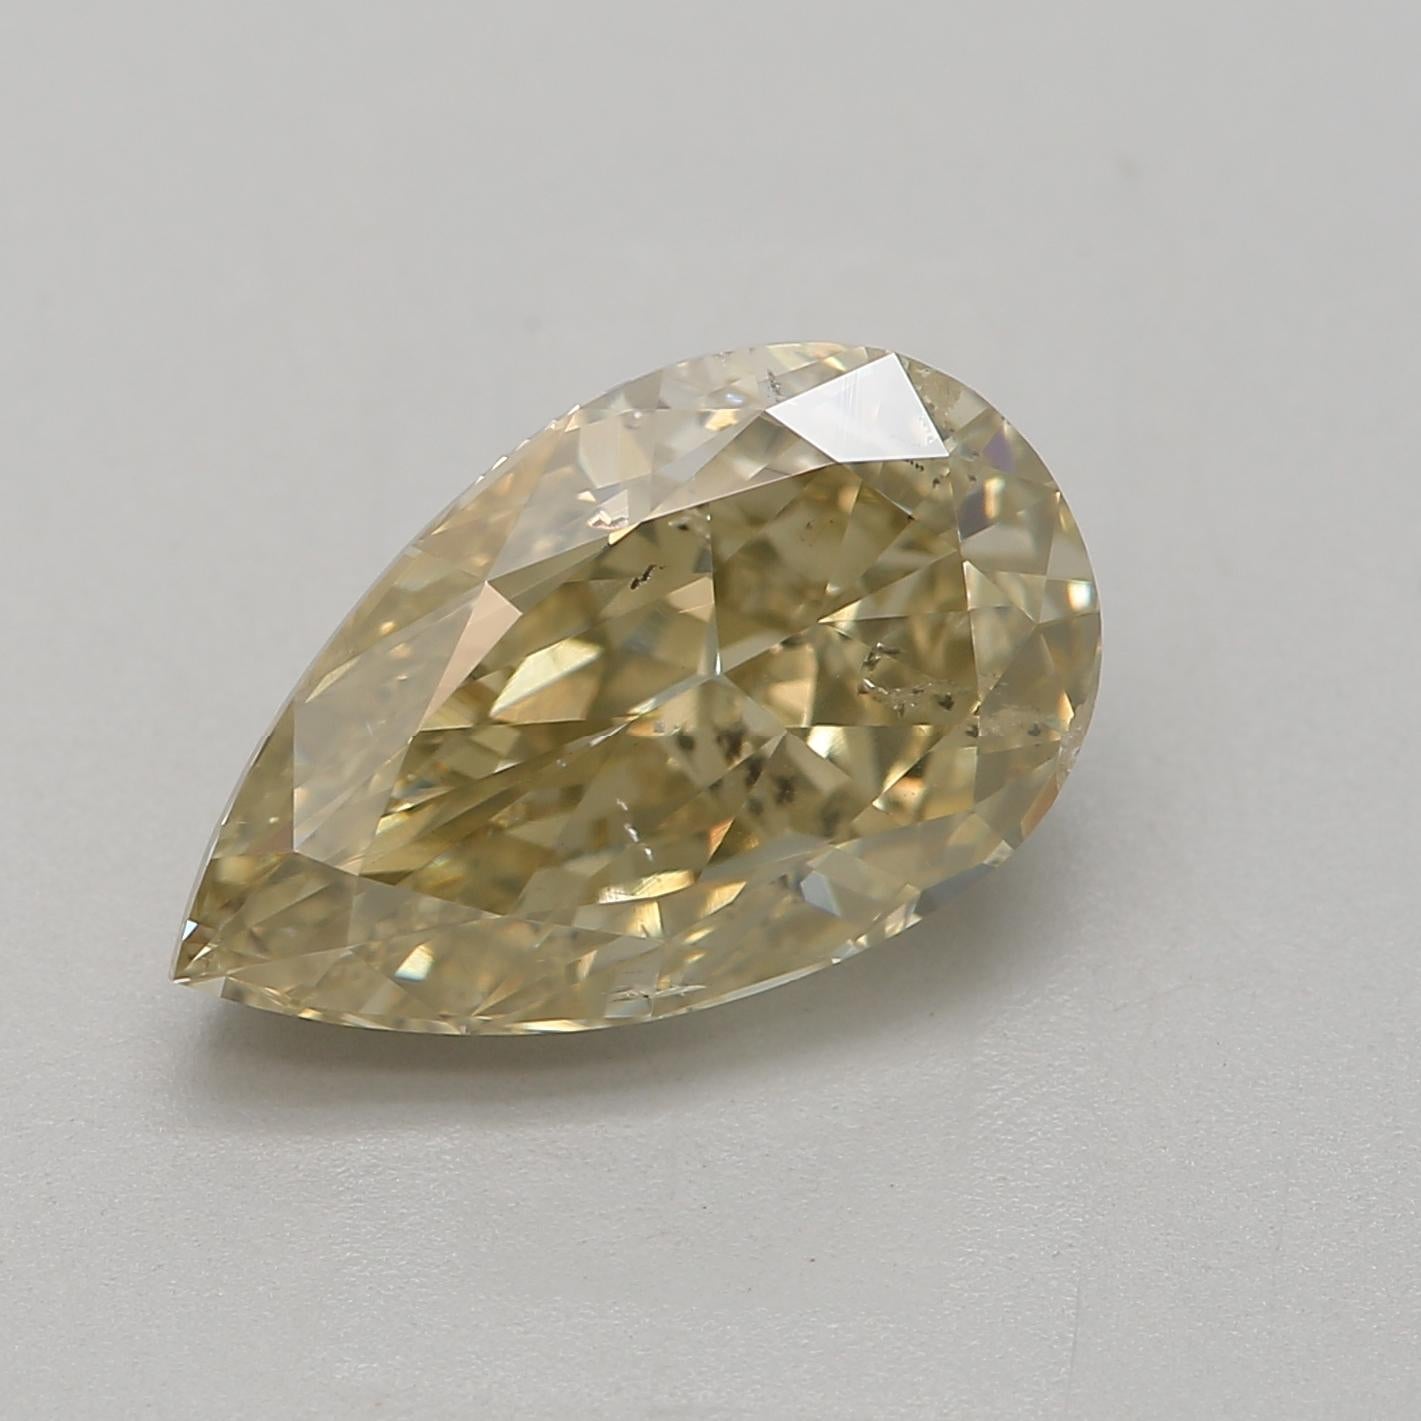 ***100% NATURAL FANCY COLOUR DIAMOND***

✪ Diamond Details ✪

➛ Shape: Pear 
➛ Colour Grade: Fancy brownish greenish yellow
➛ Carat: 2.00
➛ Clarity: SI2
➛ GIA Certified 

^FEATURES OF THE DIAMOND^

This 2-carat diamond is a precious gemstone